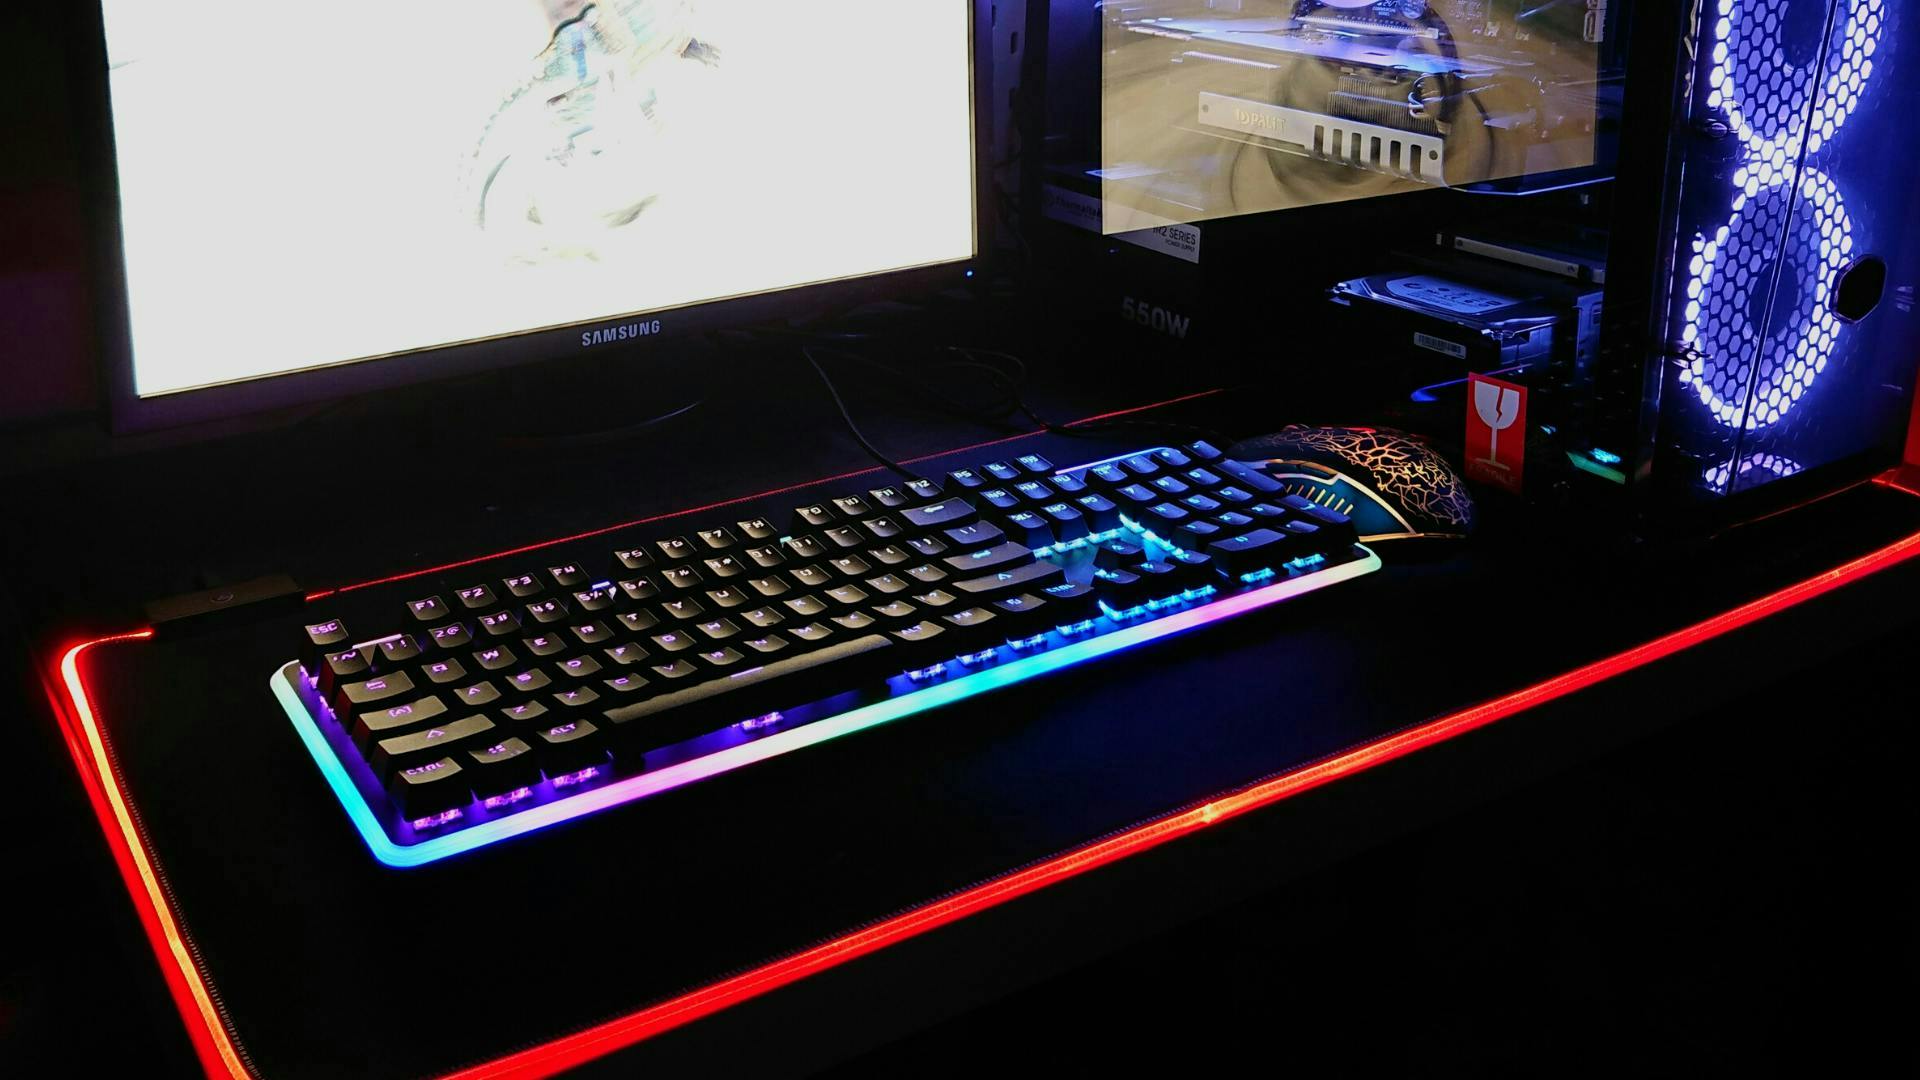 Awesome PC gaming accessories that will change the way you play